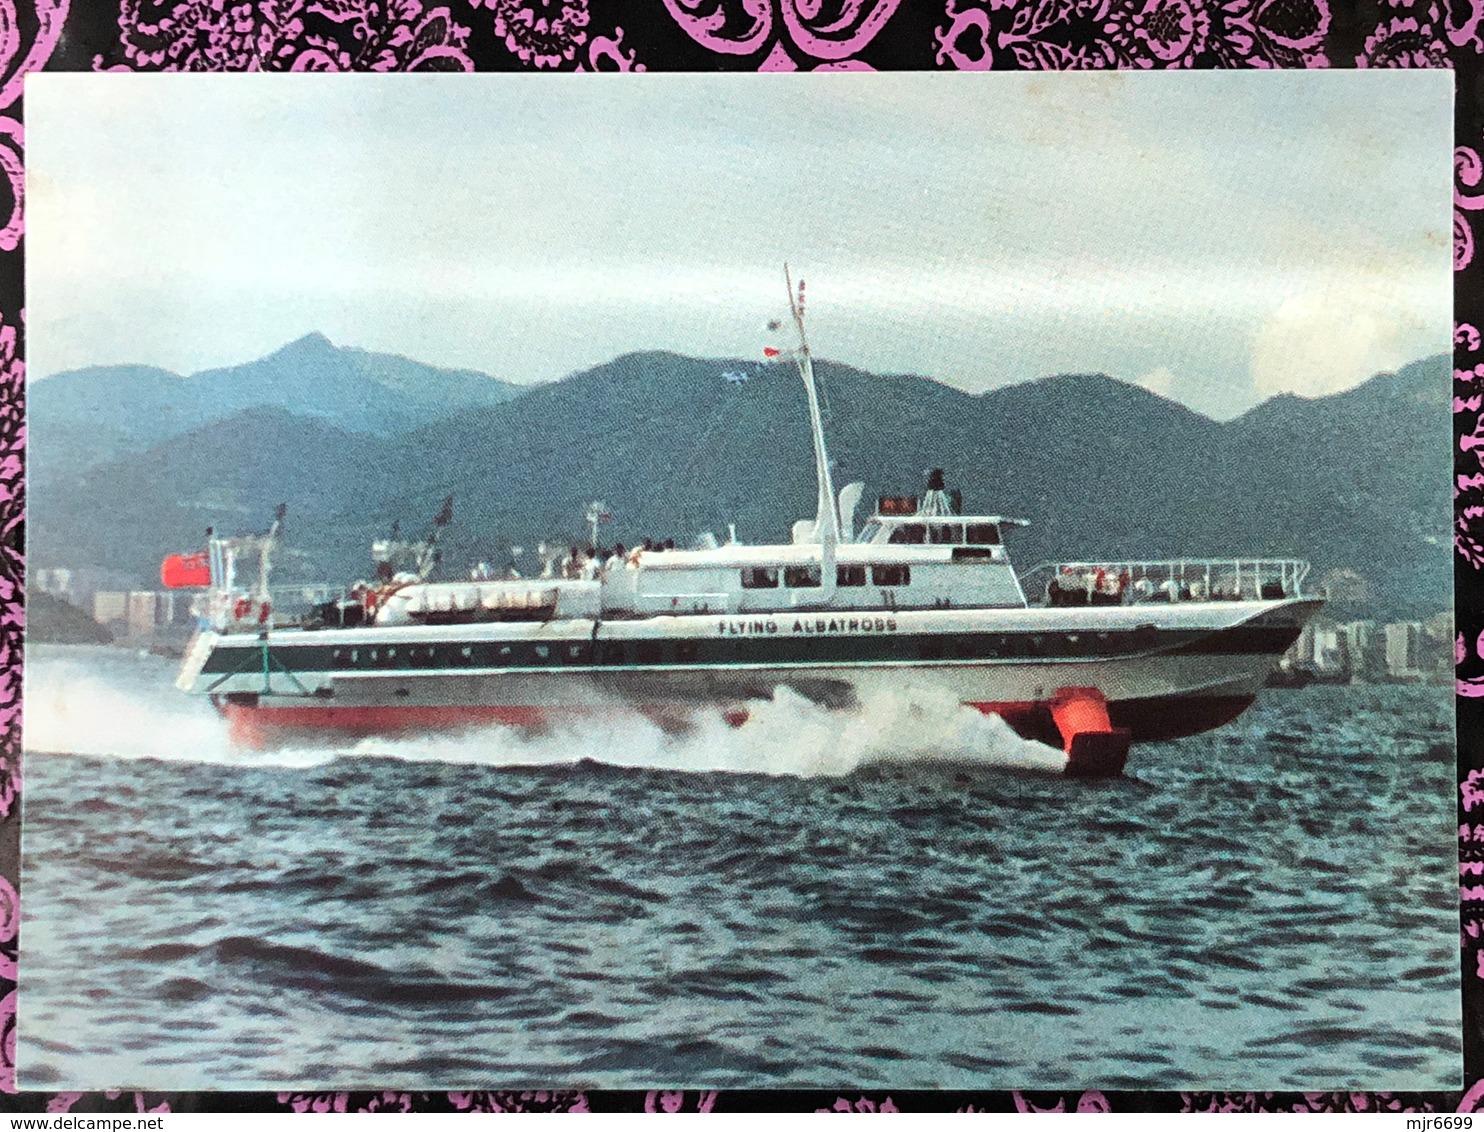 MACAU 1986 POST OFFICE ISSUE POST CARD - HYDROFOIL. - China